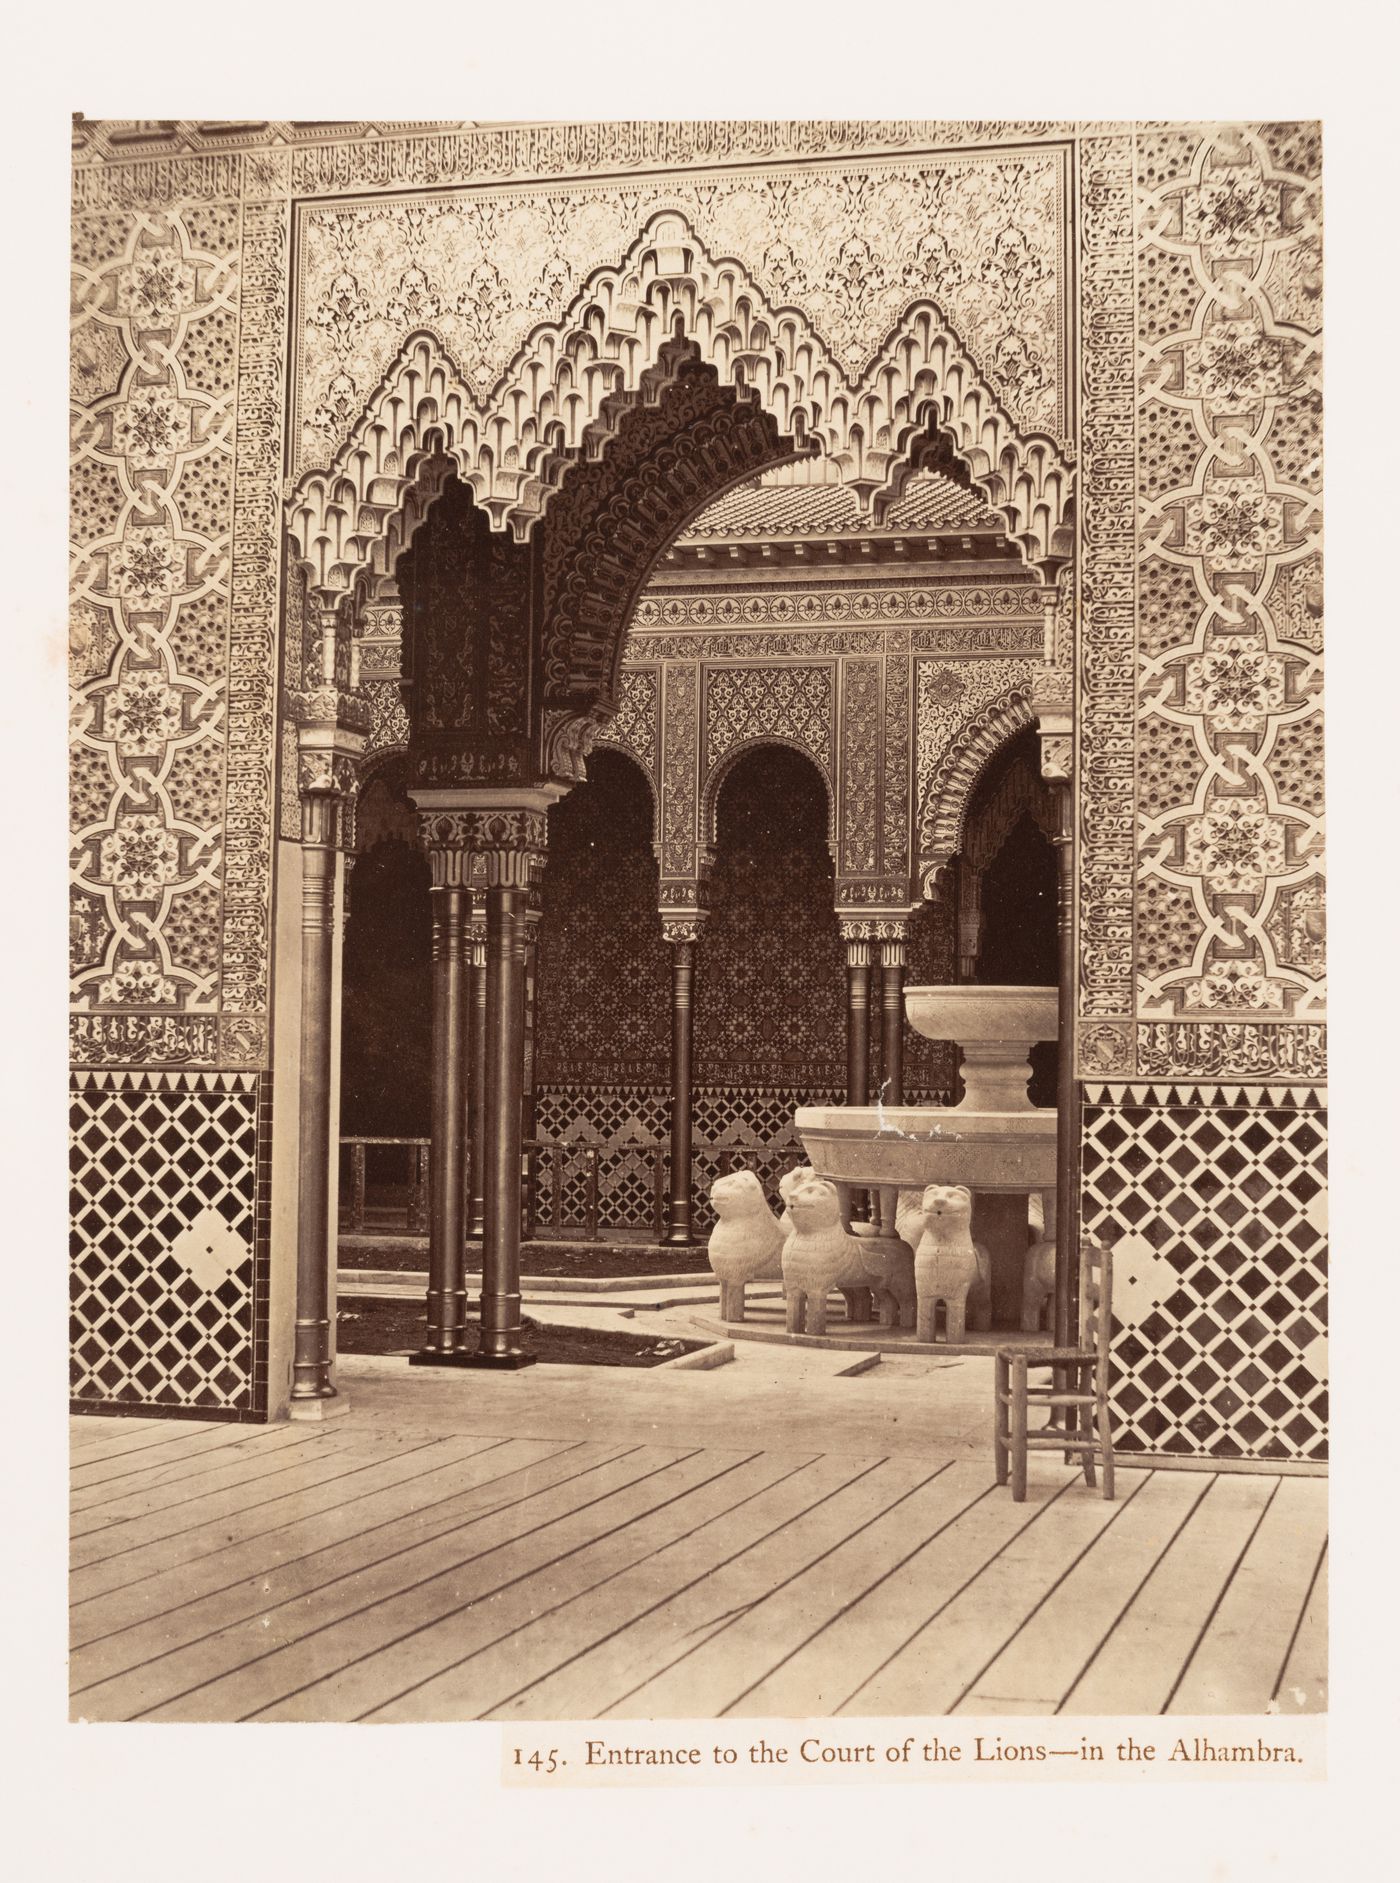 Entrance to the Court of the Lions in the Alhambra, Crystal Palace, Sydenham, England